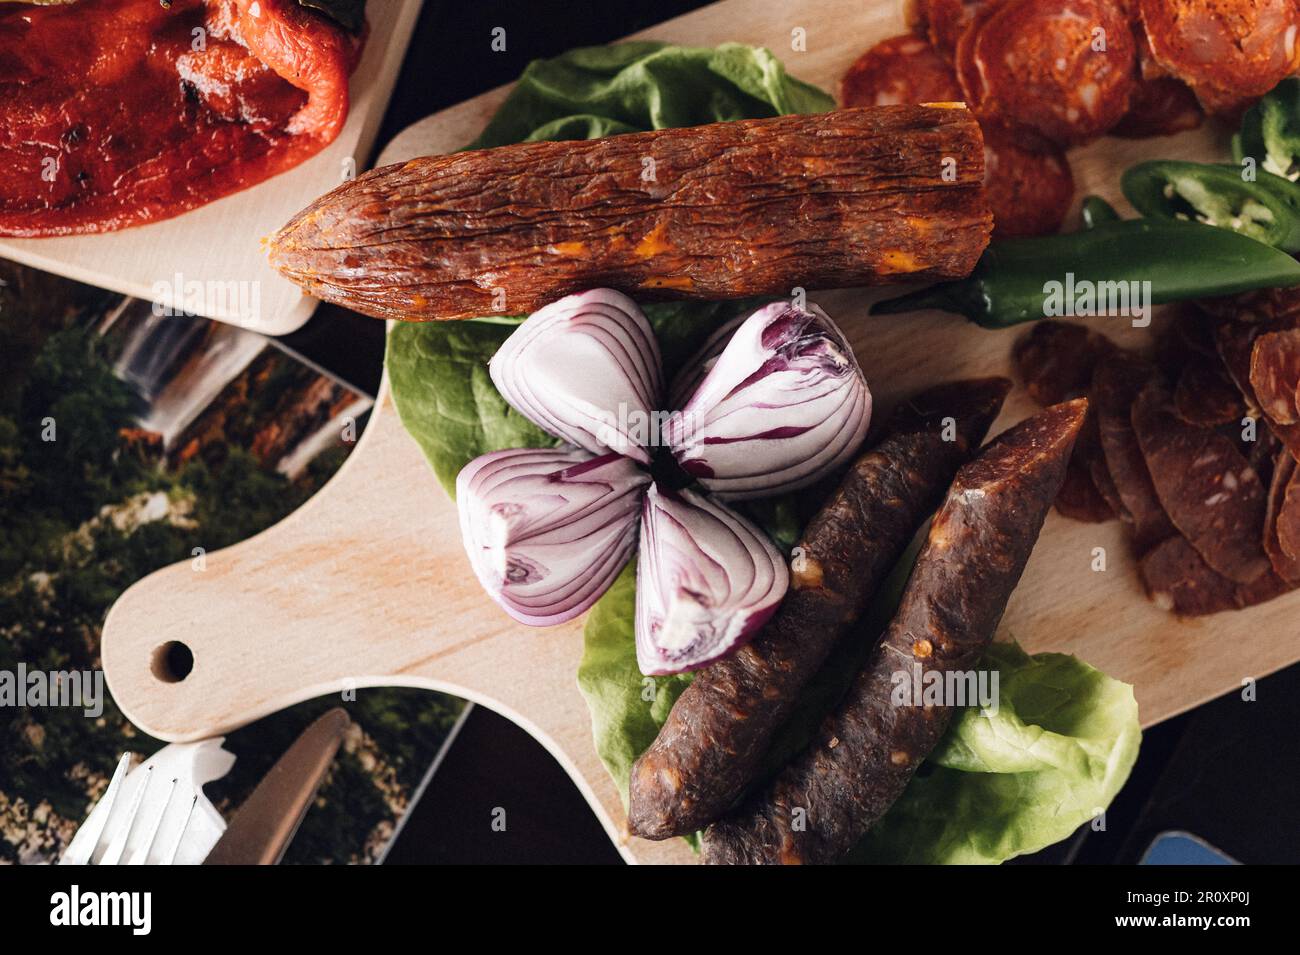 A wooden cutting board with a variety of cured meats. Stock Photo